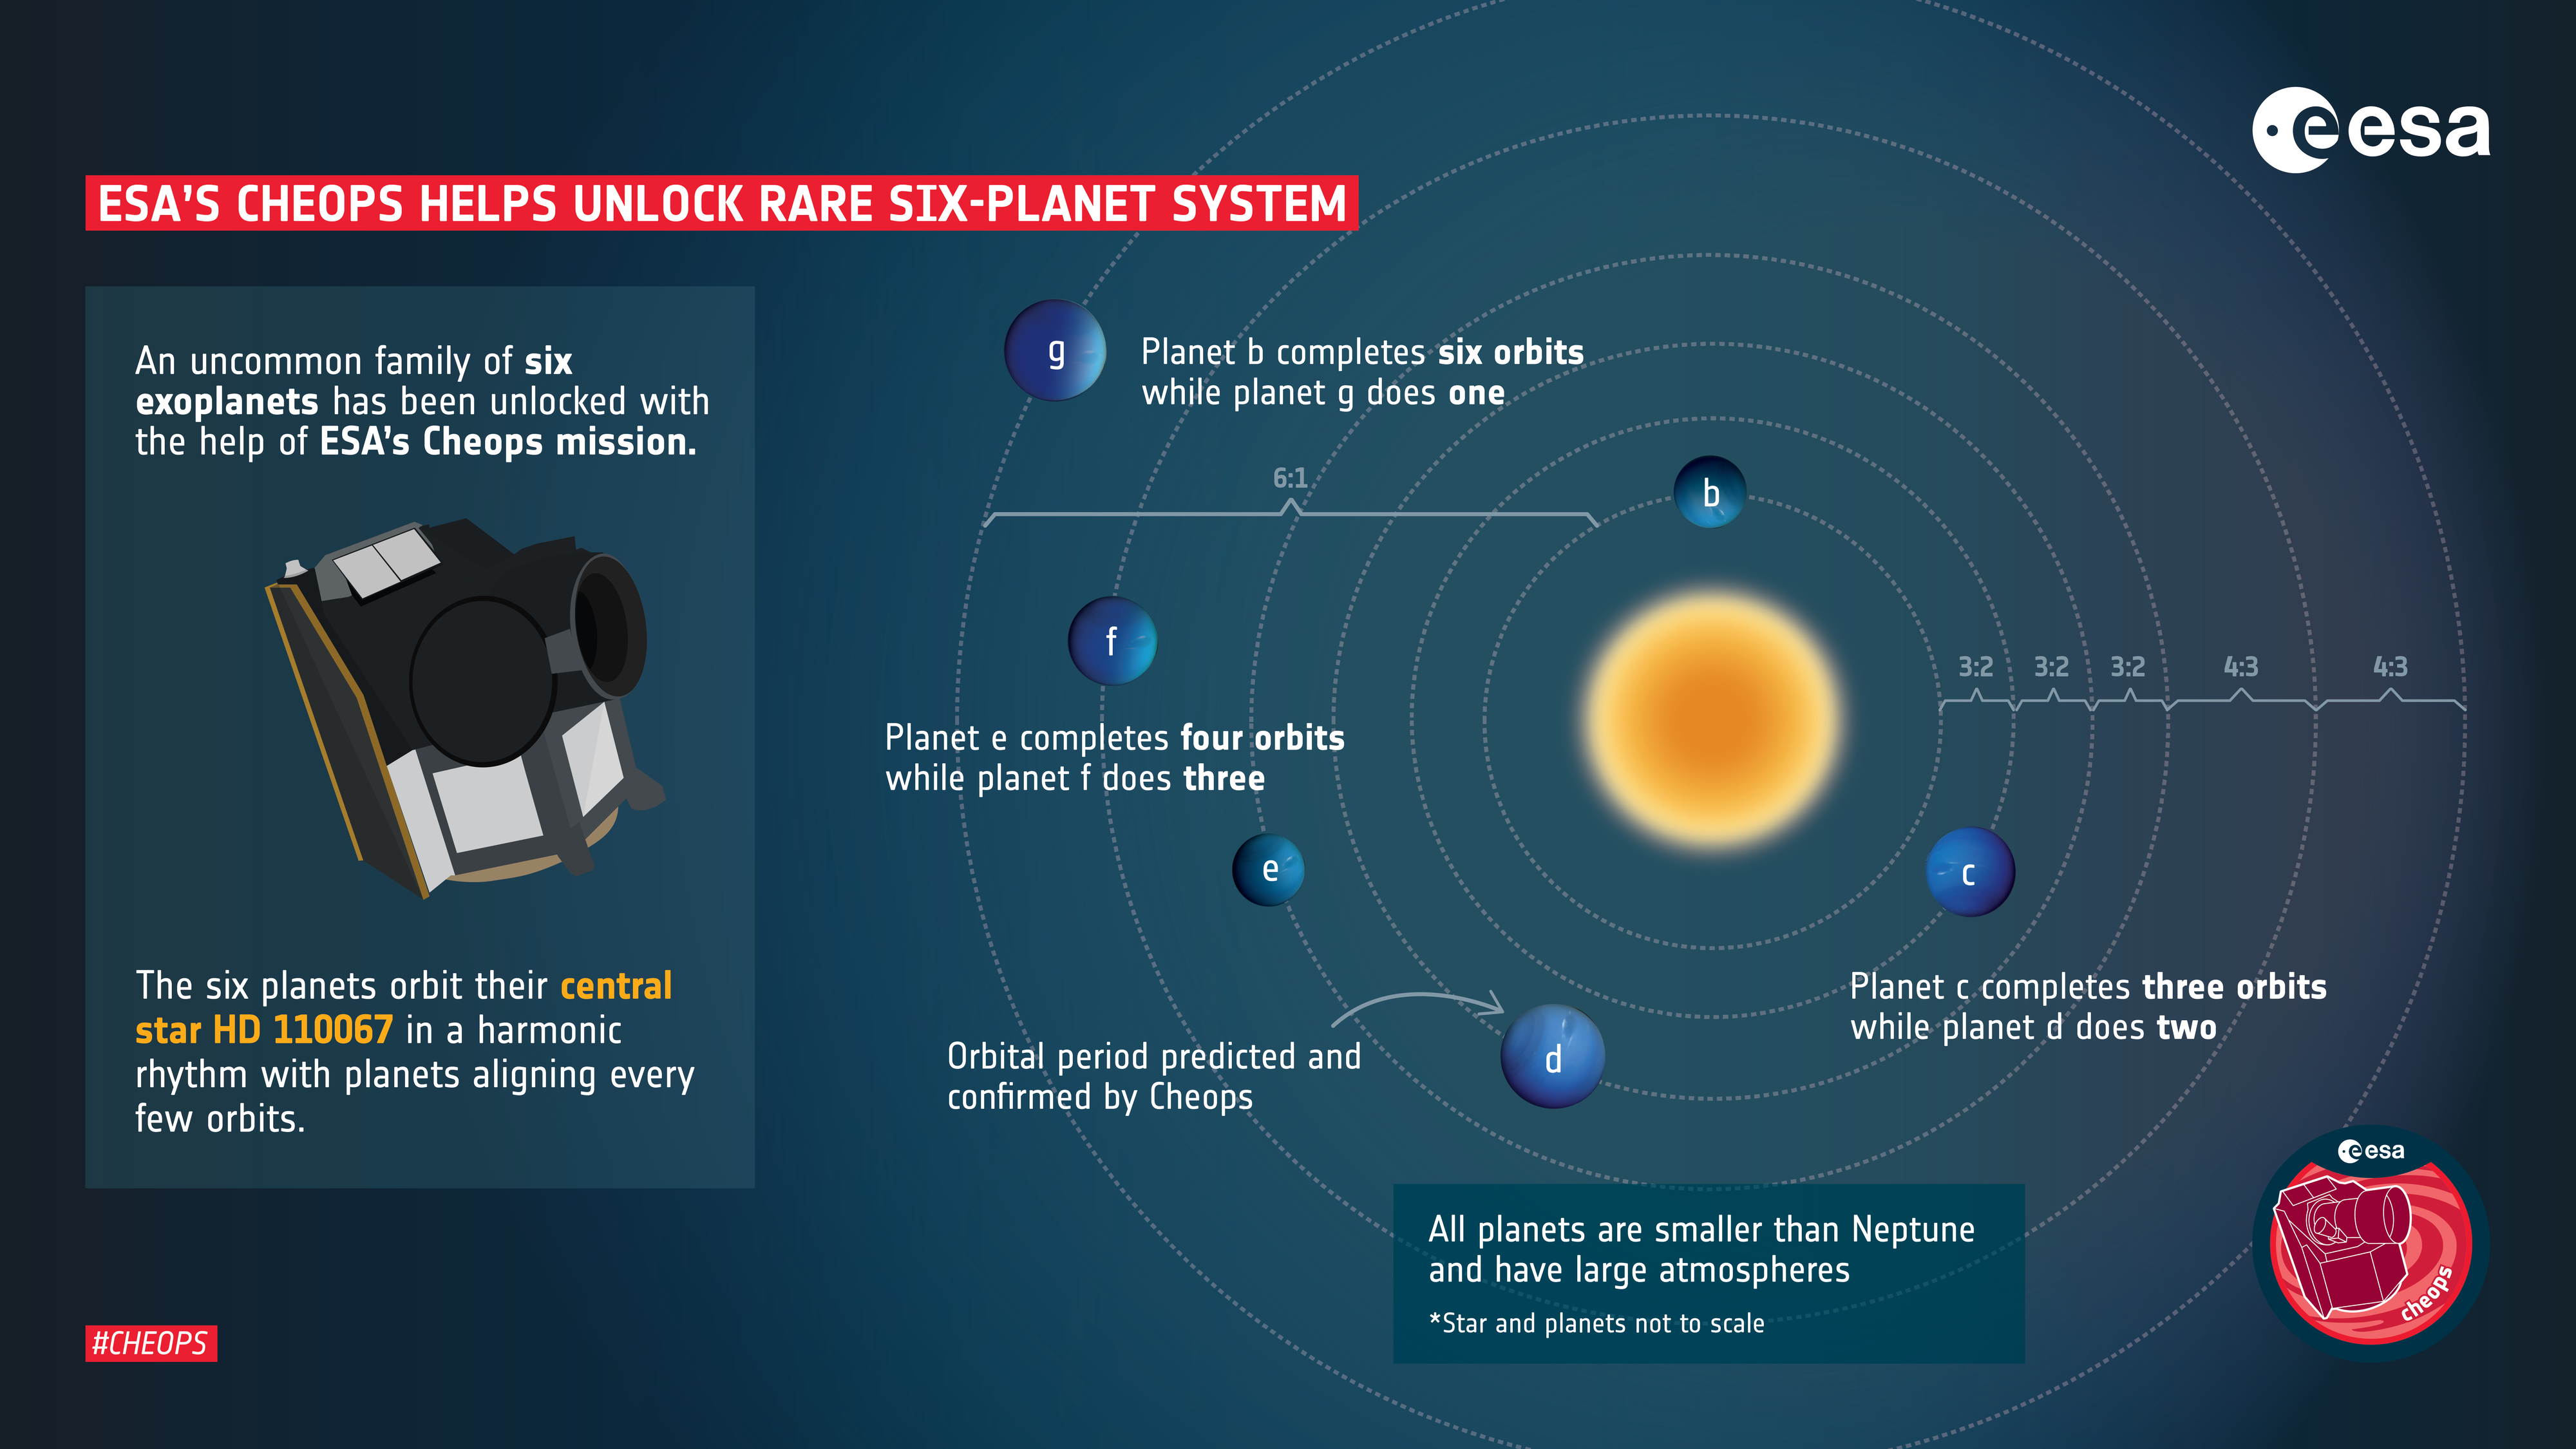 A rare family of six exoplanets has been unlocked with the help of ESA’s Cheops mission. The planets in this family are all smaller than Neptune and revolve around their star HD110067 in a very precise waltz. When the closest planet to the star makes three full revolutions around it, the second one makes exactly two during the same time. This is called a 3:2 resonance. The six planets form a resonant chain in pairs of 3:2, 3:2, 3:2, 4:3, and 4:3, resulting in the closest planet completing six orbits while the outer-most planet does one